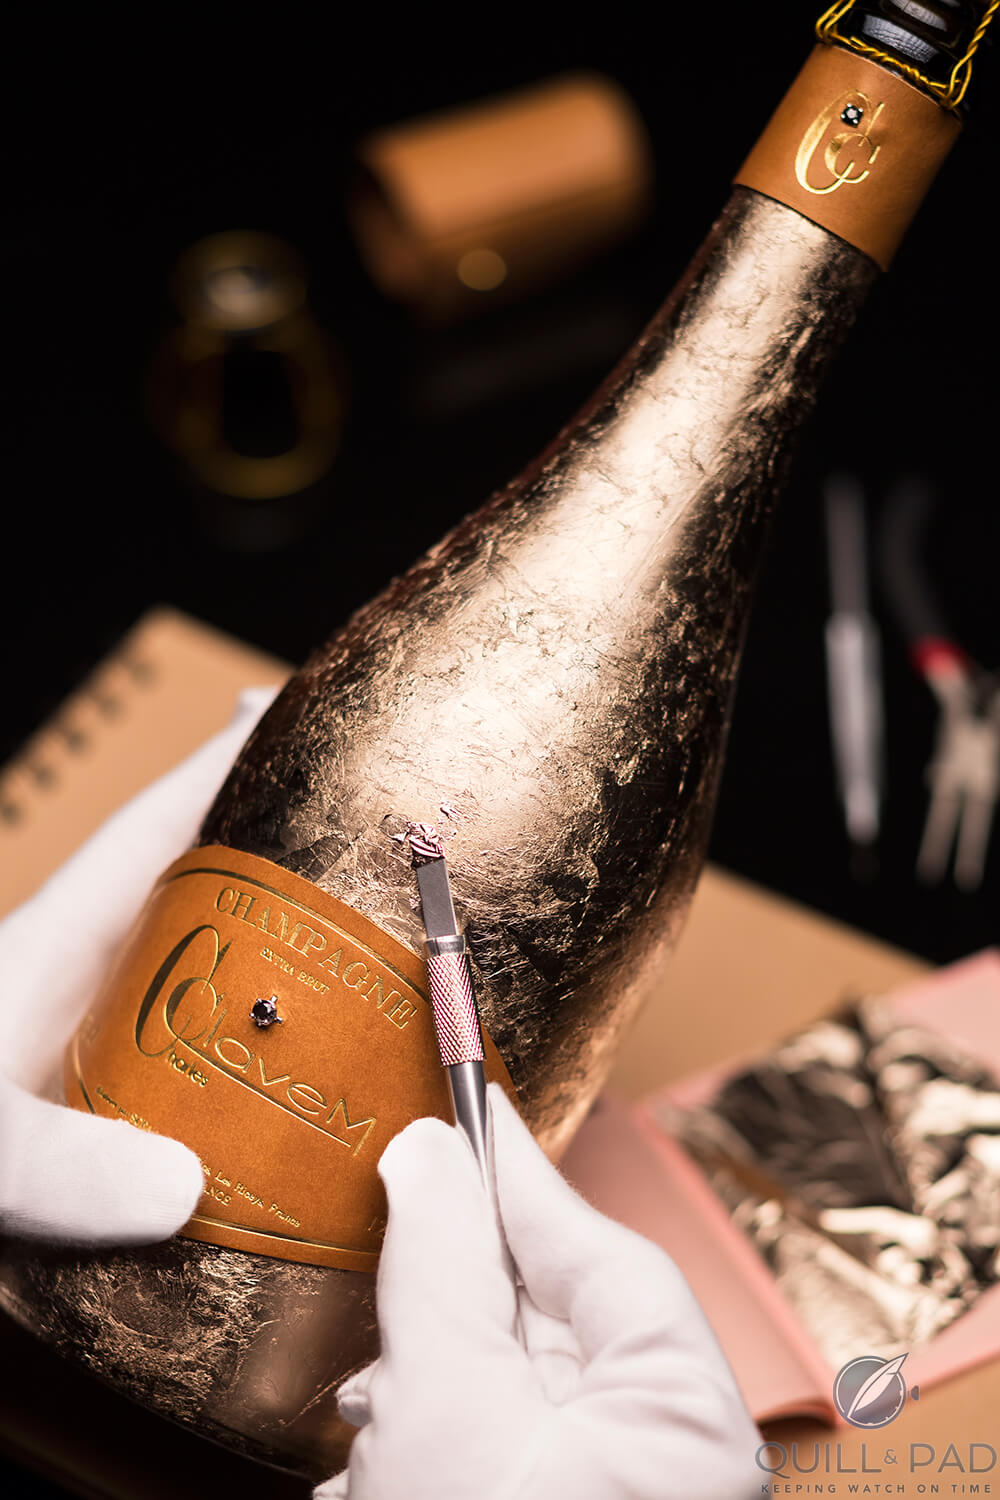 Applying textured gold foil to a bottle of Charles Clavem champagne